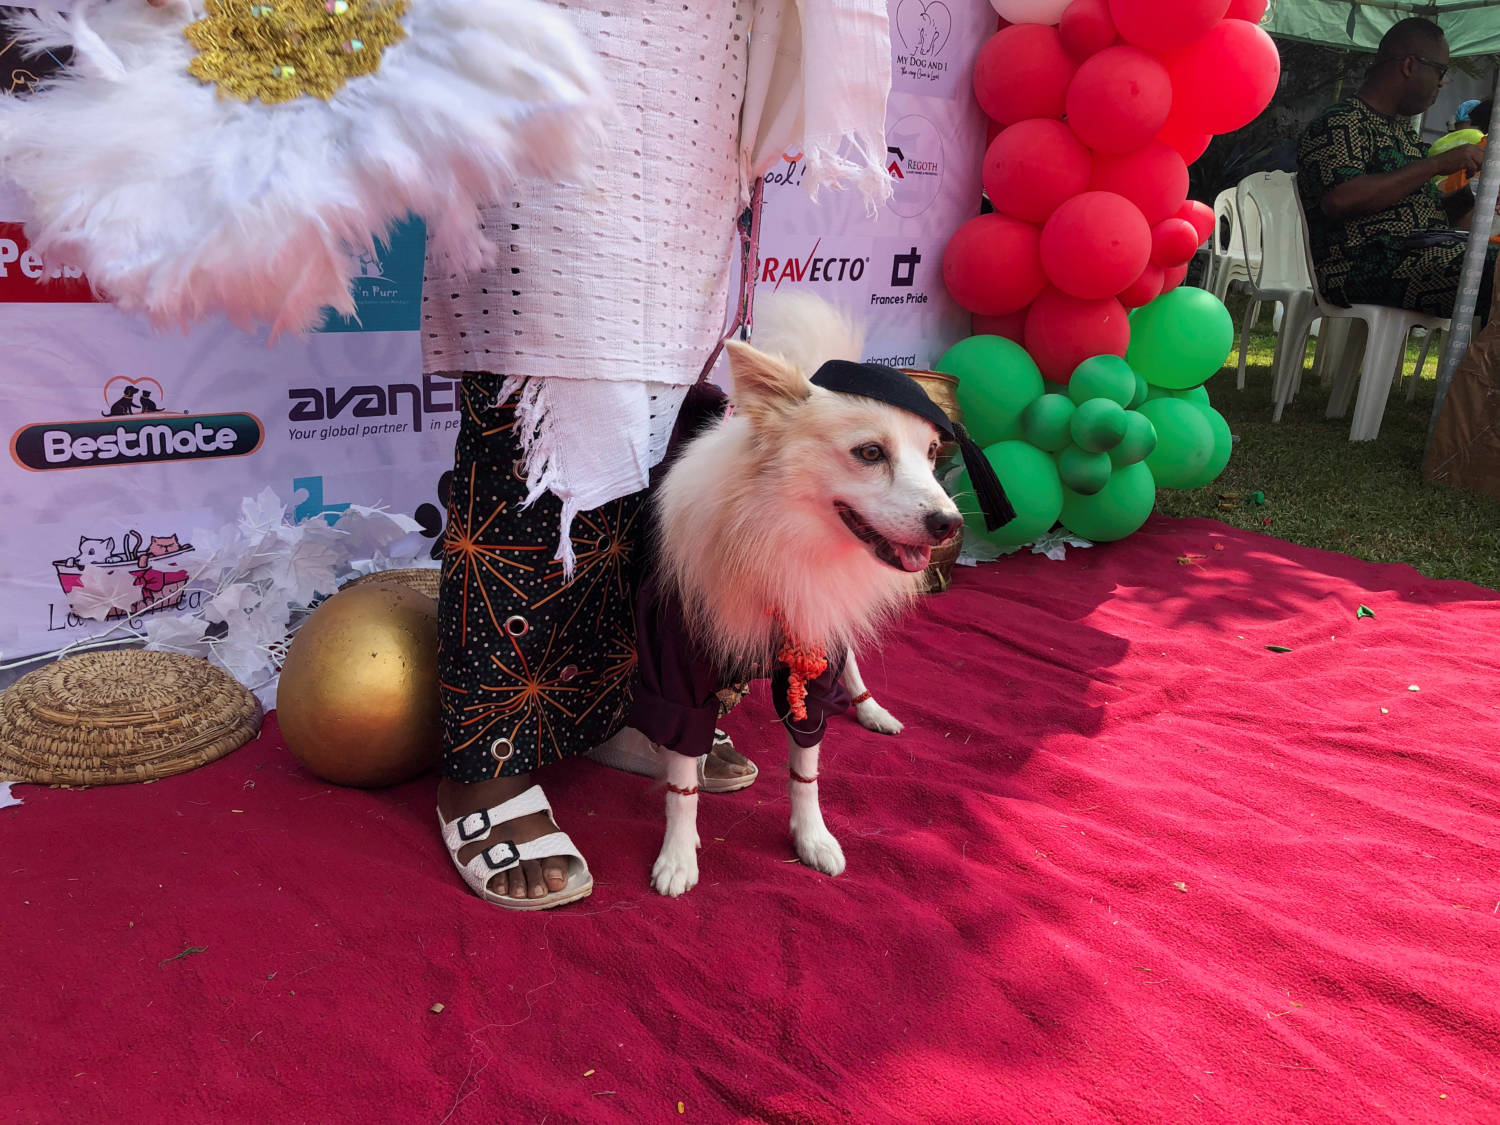 A Dog Dressed In The Traditional Igbo Attire Stands For A Photograph On The Red Carpet At The Annual Lagos Dog Carnival, In Lagos